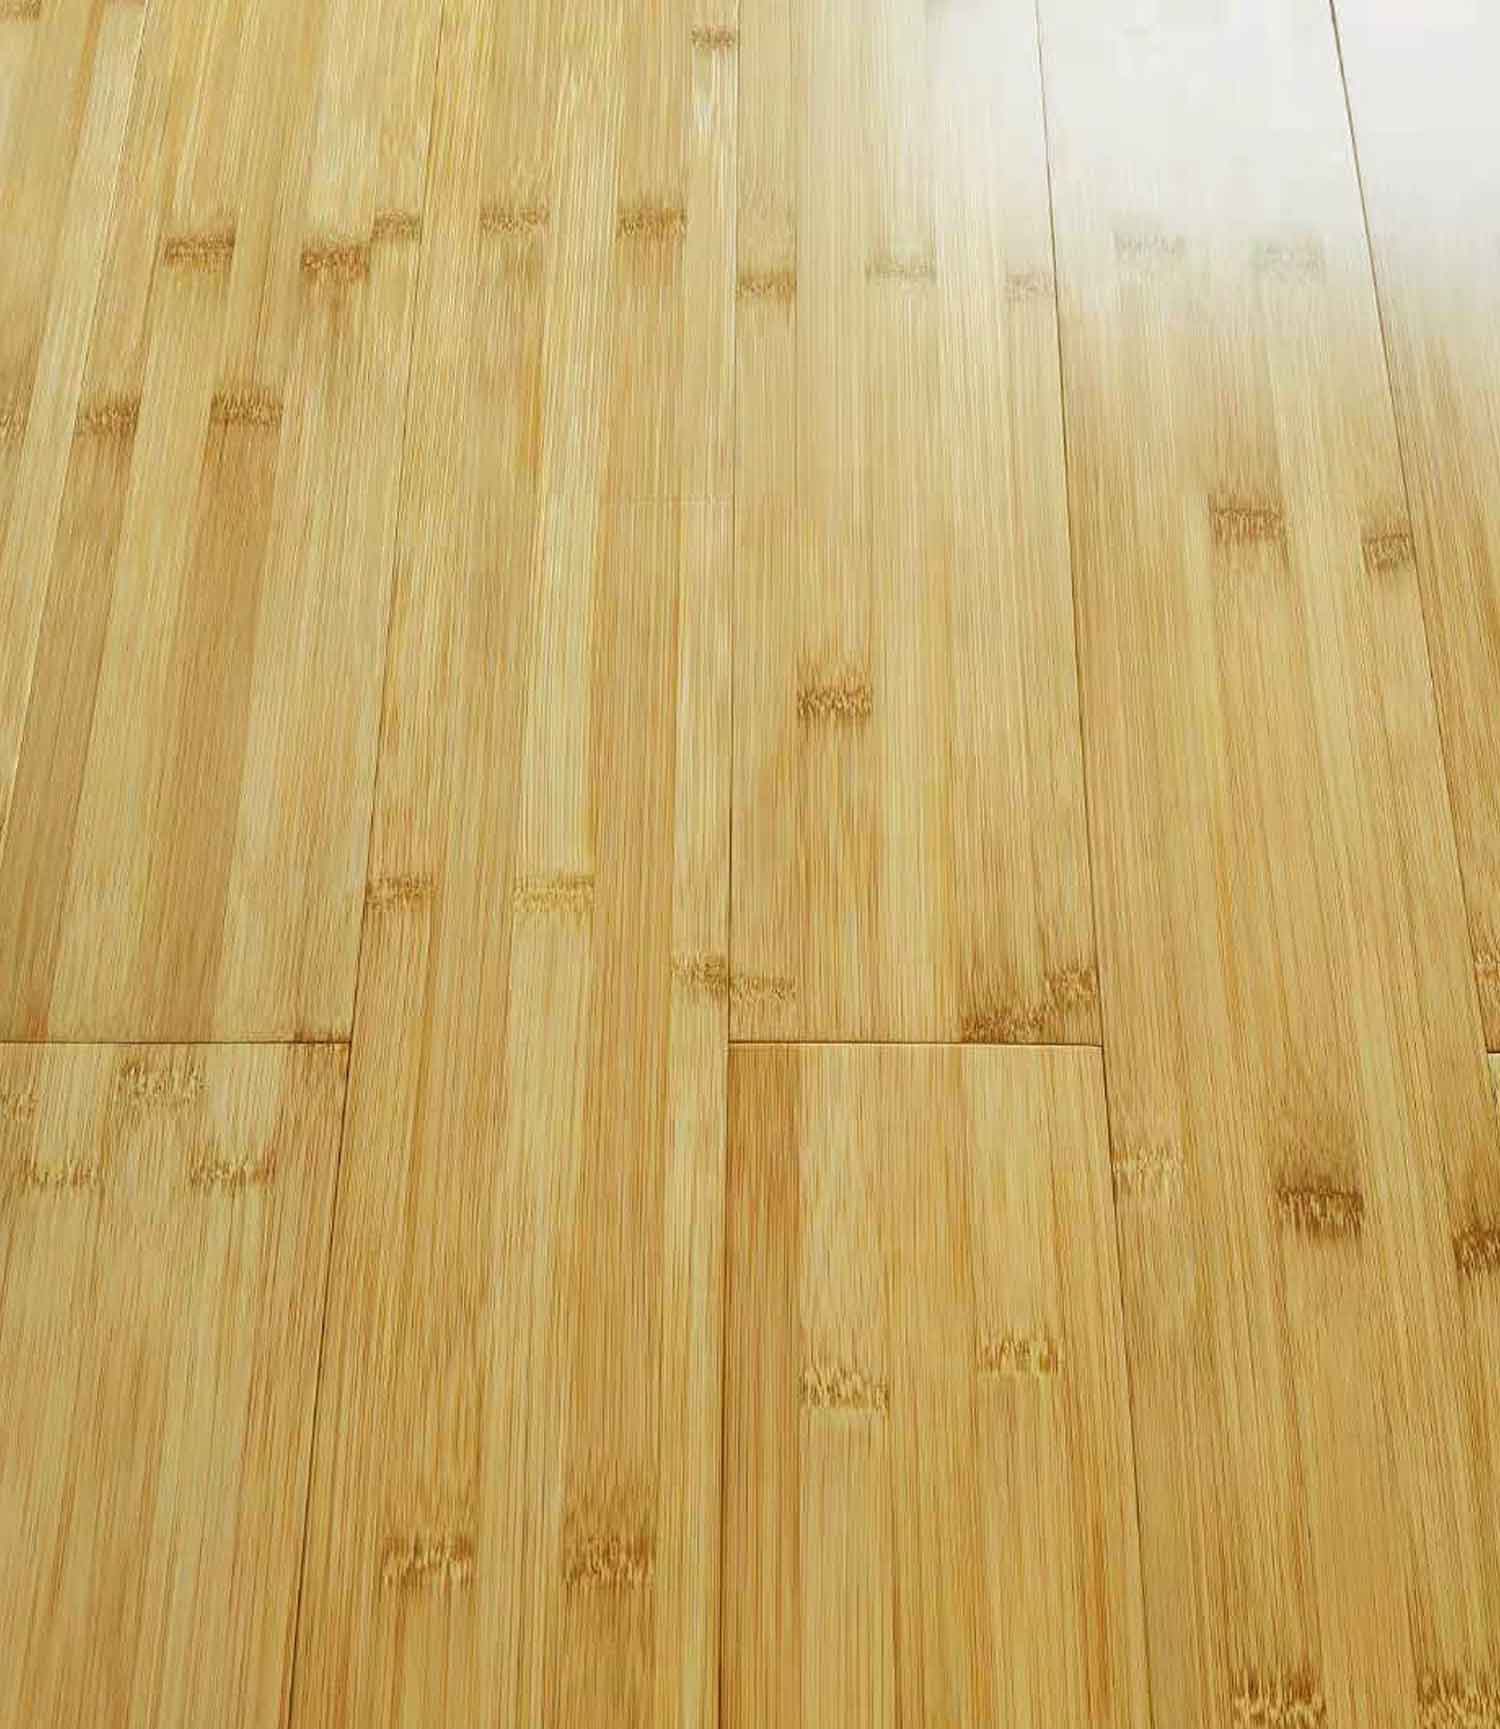 bamboo flooring suppliers melbourne